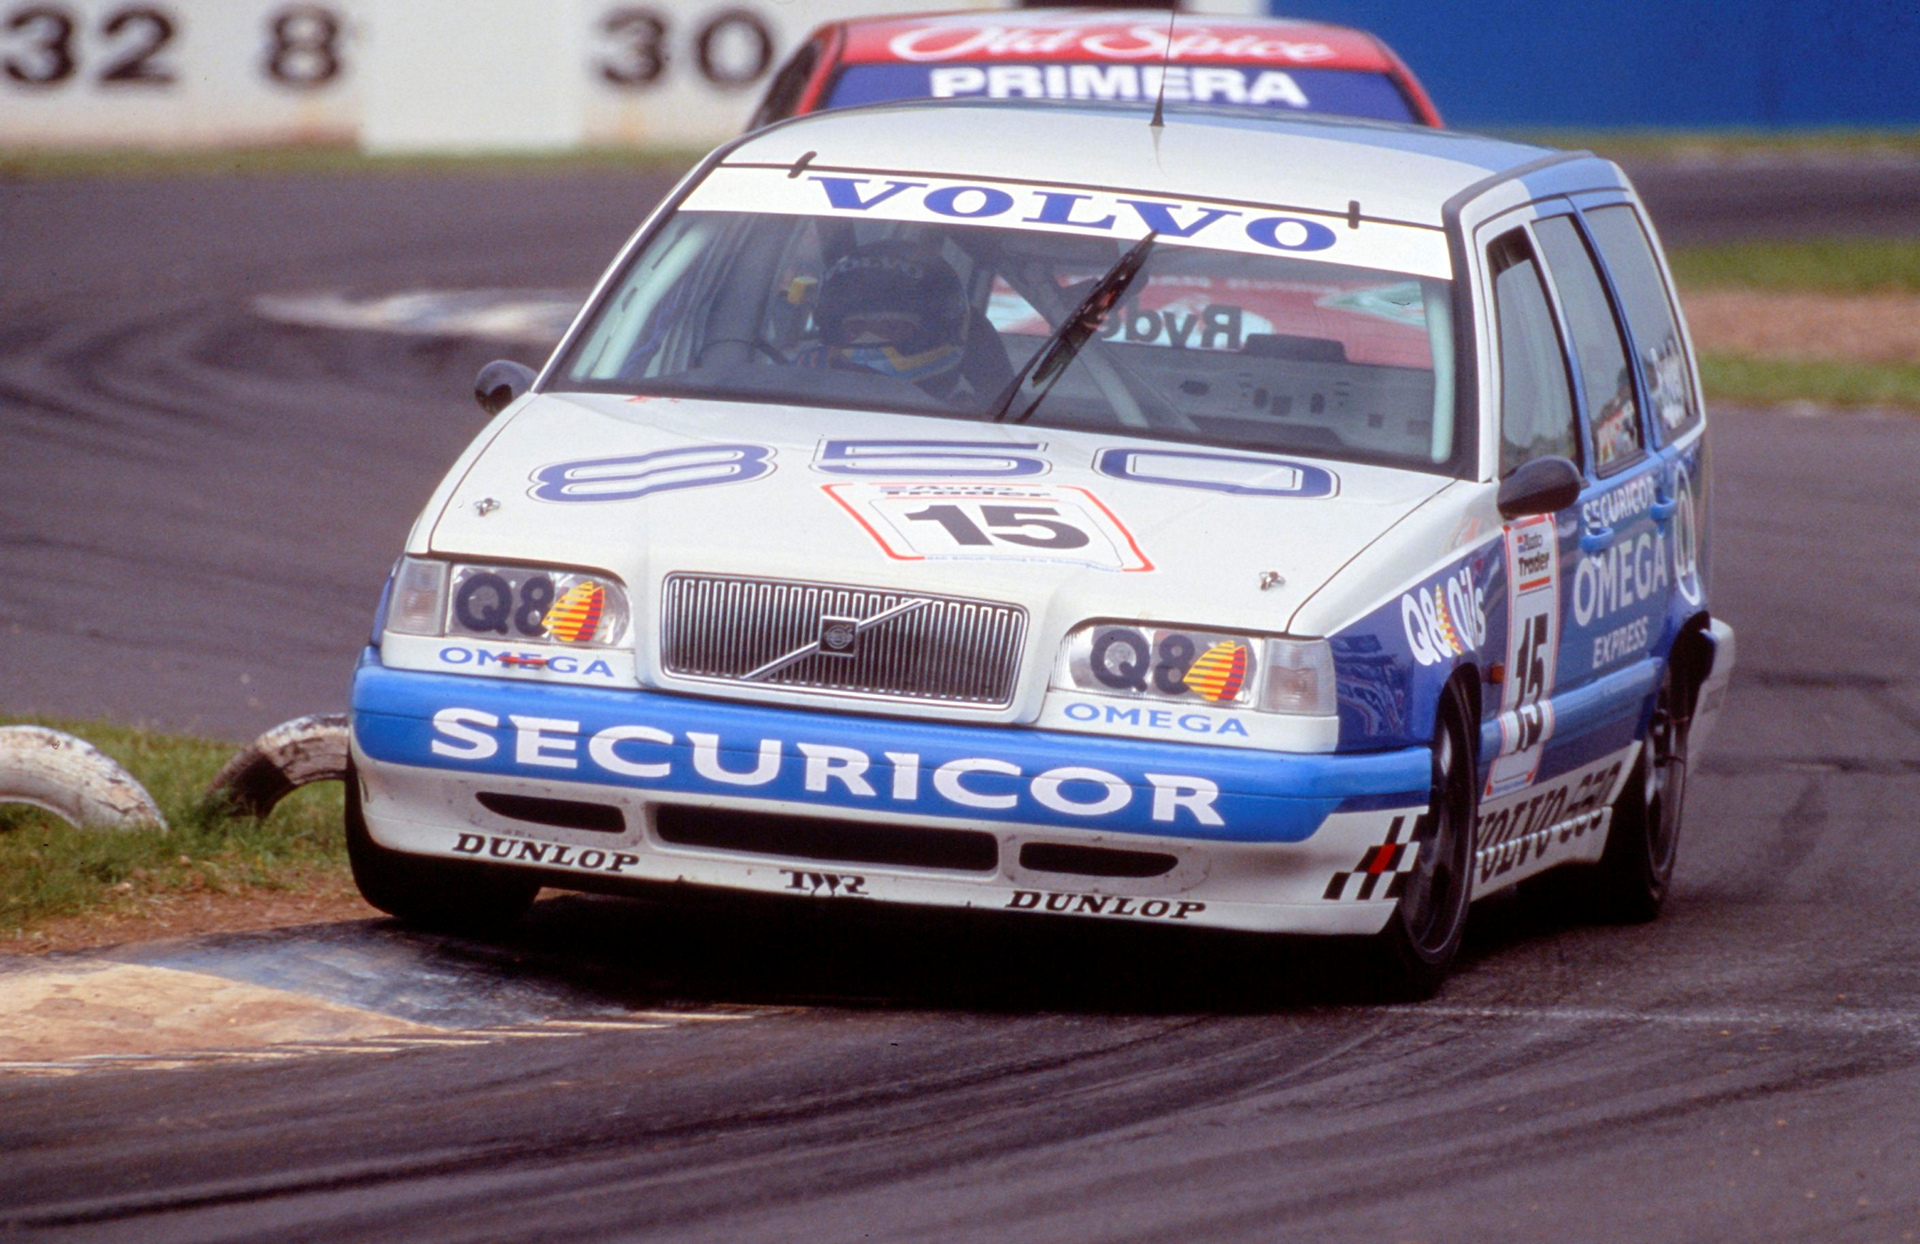 The Volvo 850 Estate in the 1994 BTCC © Zhejiang Geely Holding Group Co., Ltd